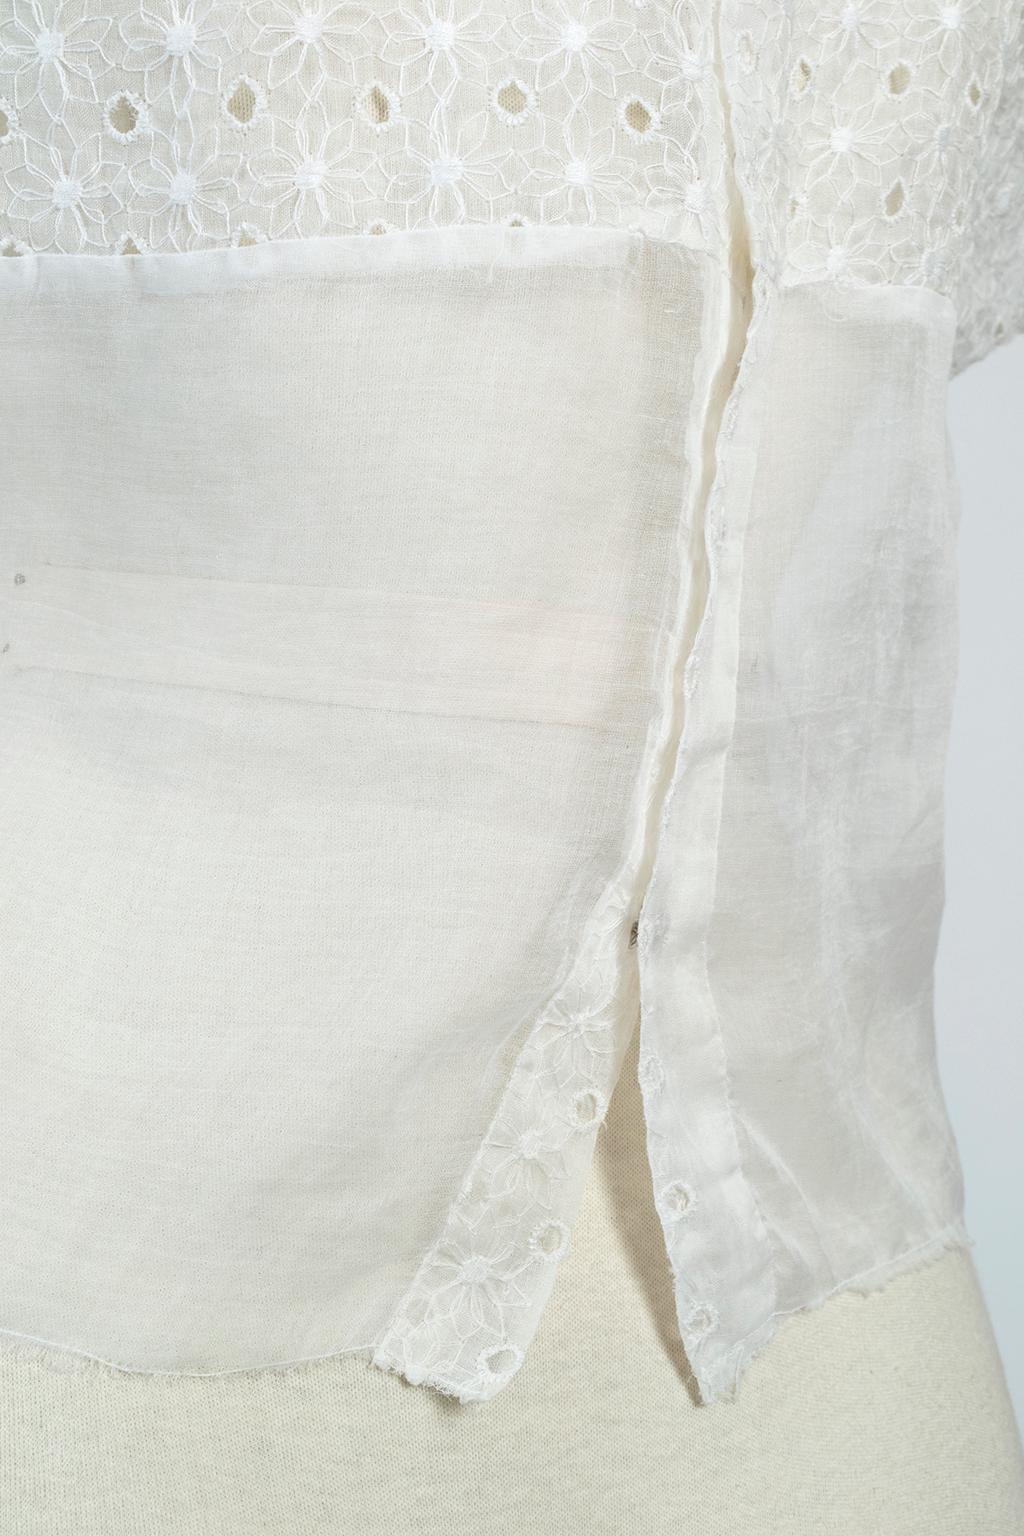 Edwardian Sheer White Organdy Eyelet Cap Sleeve Blouse w Square Neck  – S, 1910s For Sale 7